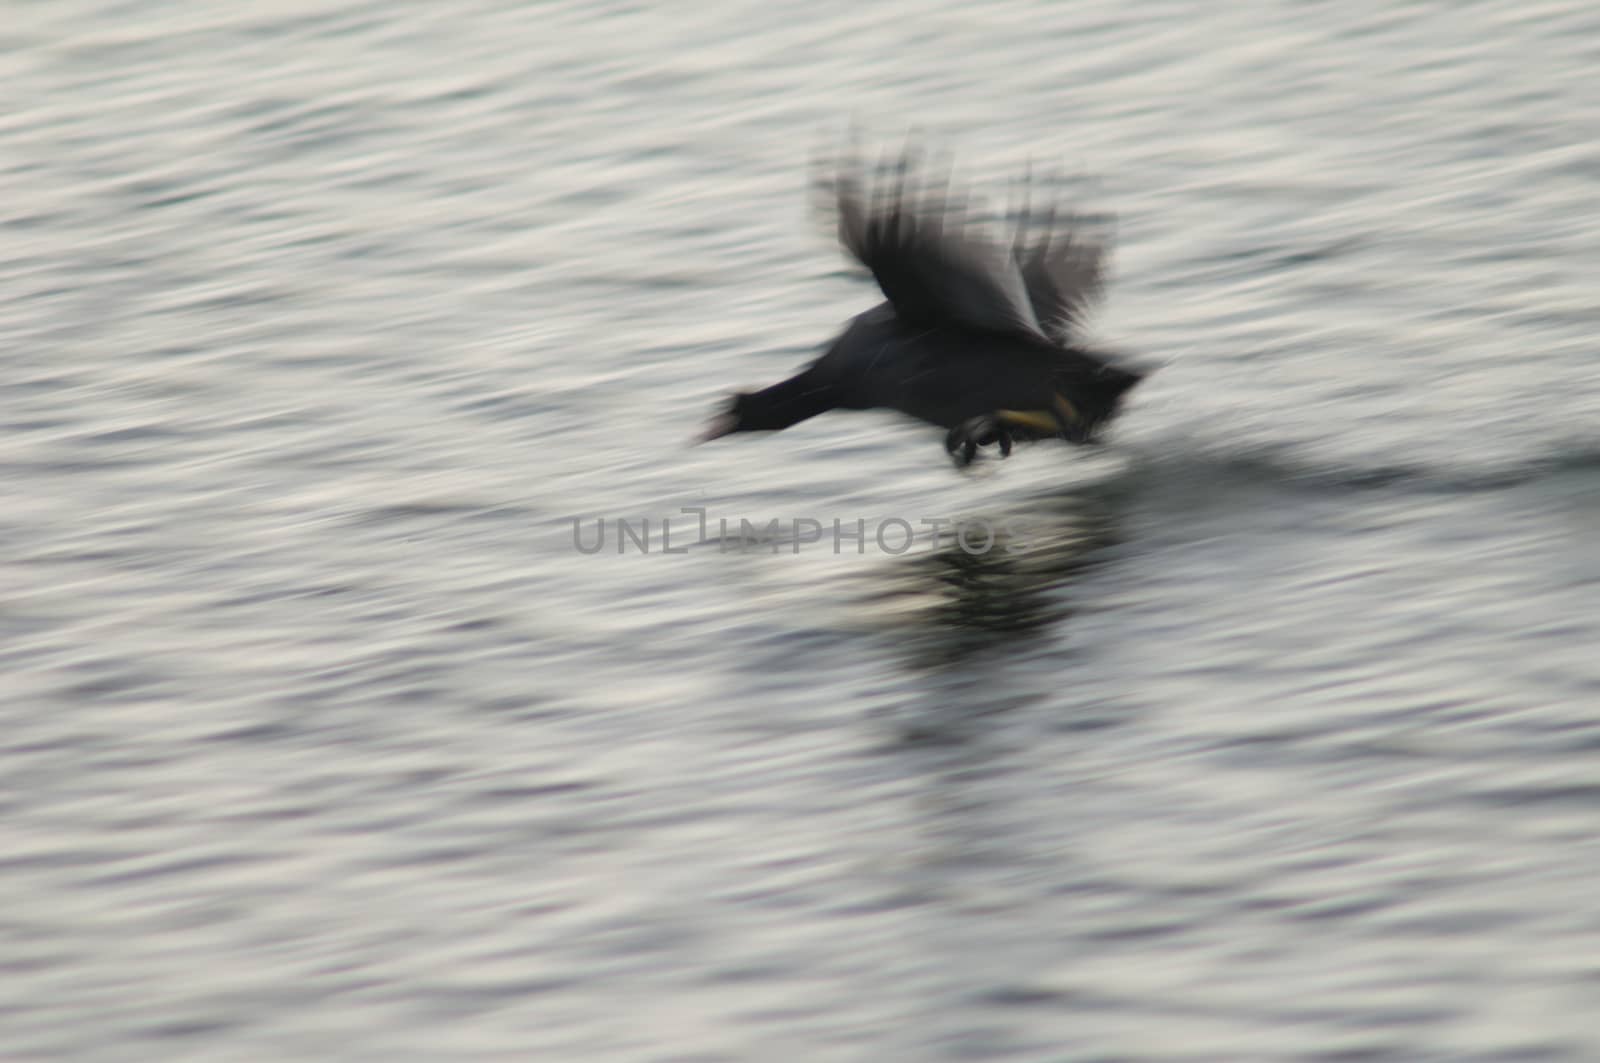 Eurasian coot (Fulica atra) chasing to another one. El Fraile lagoon. Arona. Tenerife. Canary Islands. Spain.